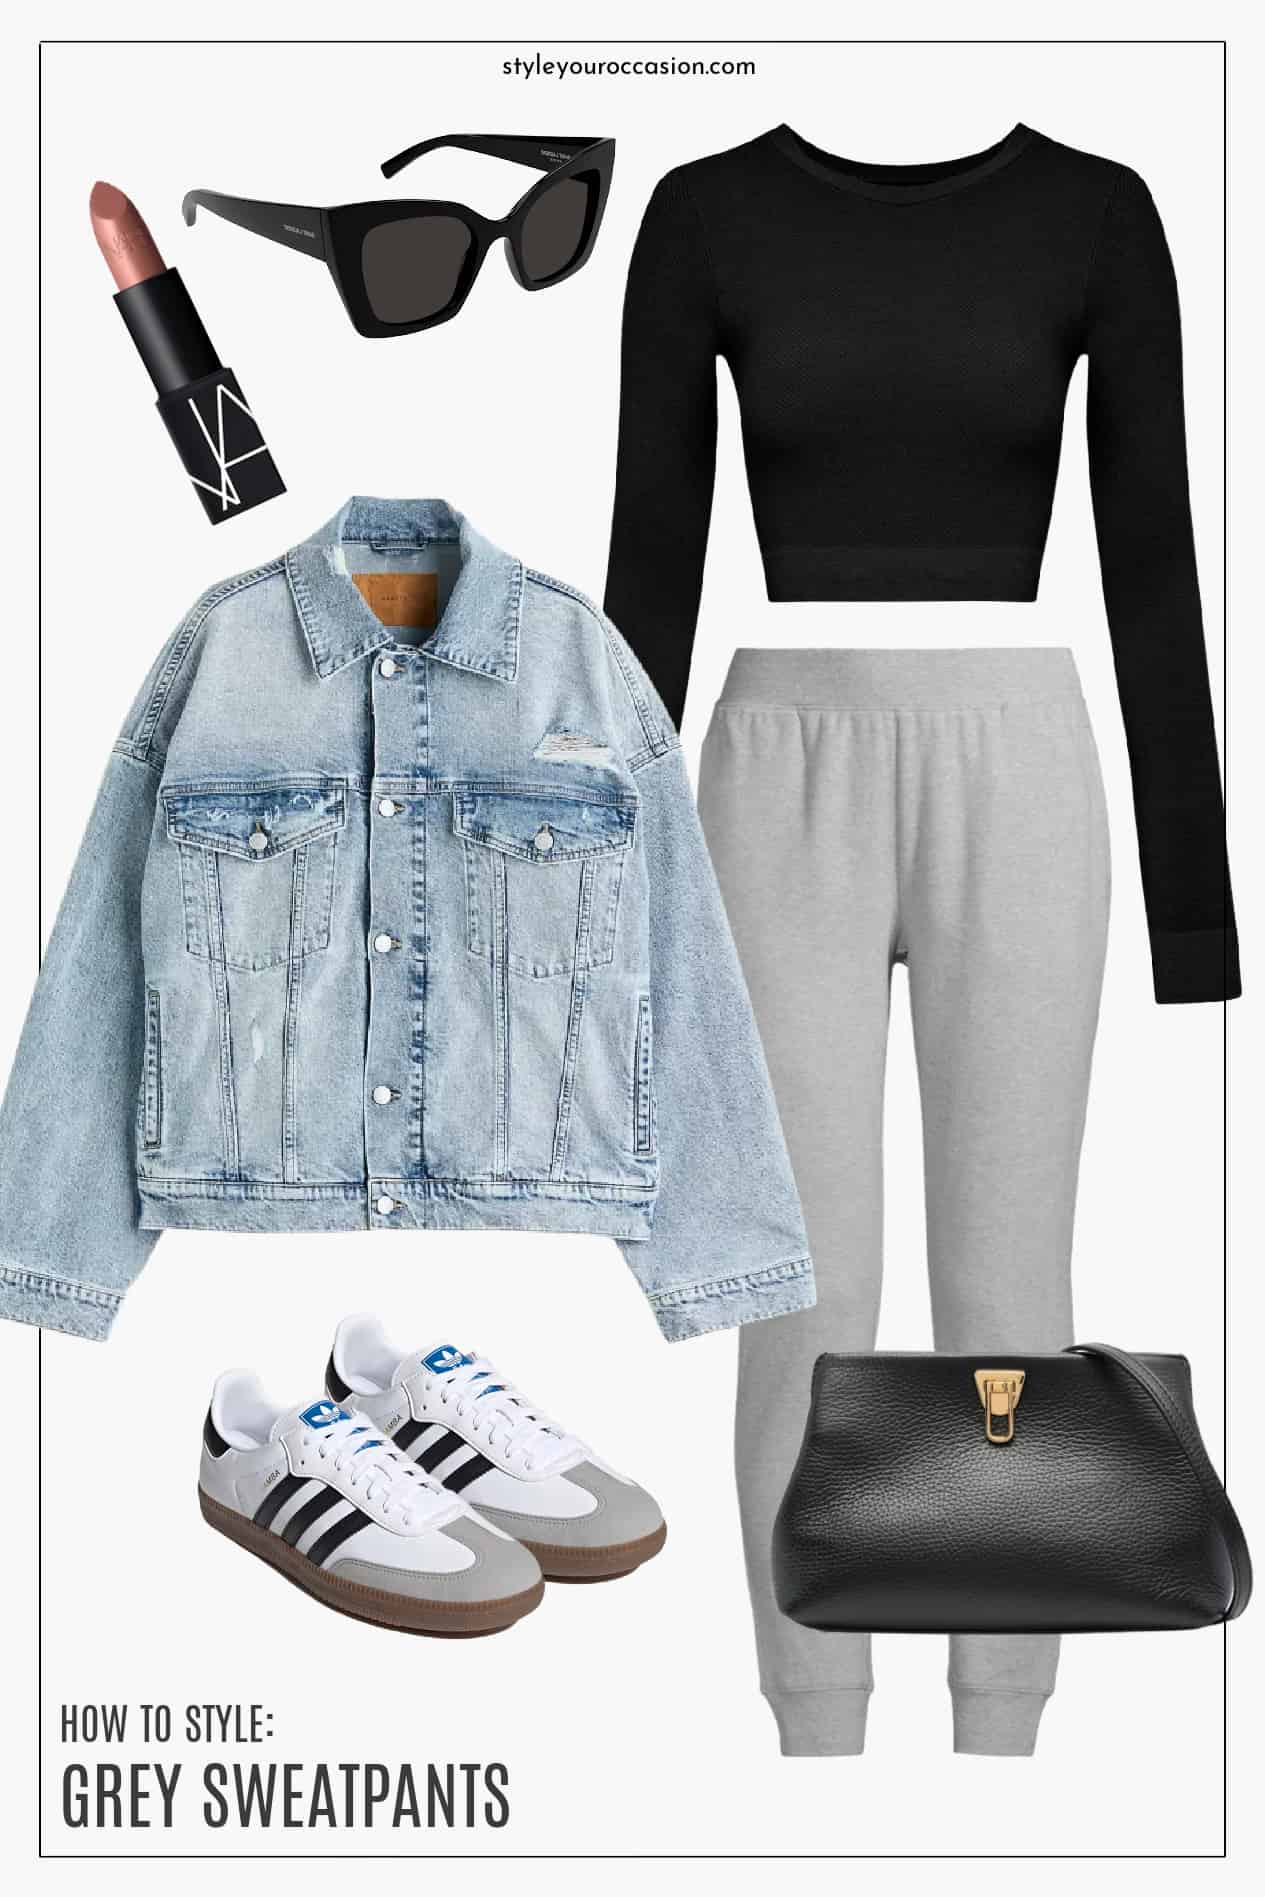 image of a style mood board with grey sweatpants, a black crop top, denim jacket, sneakers, and black purse